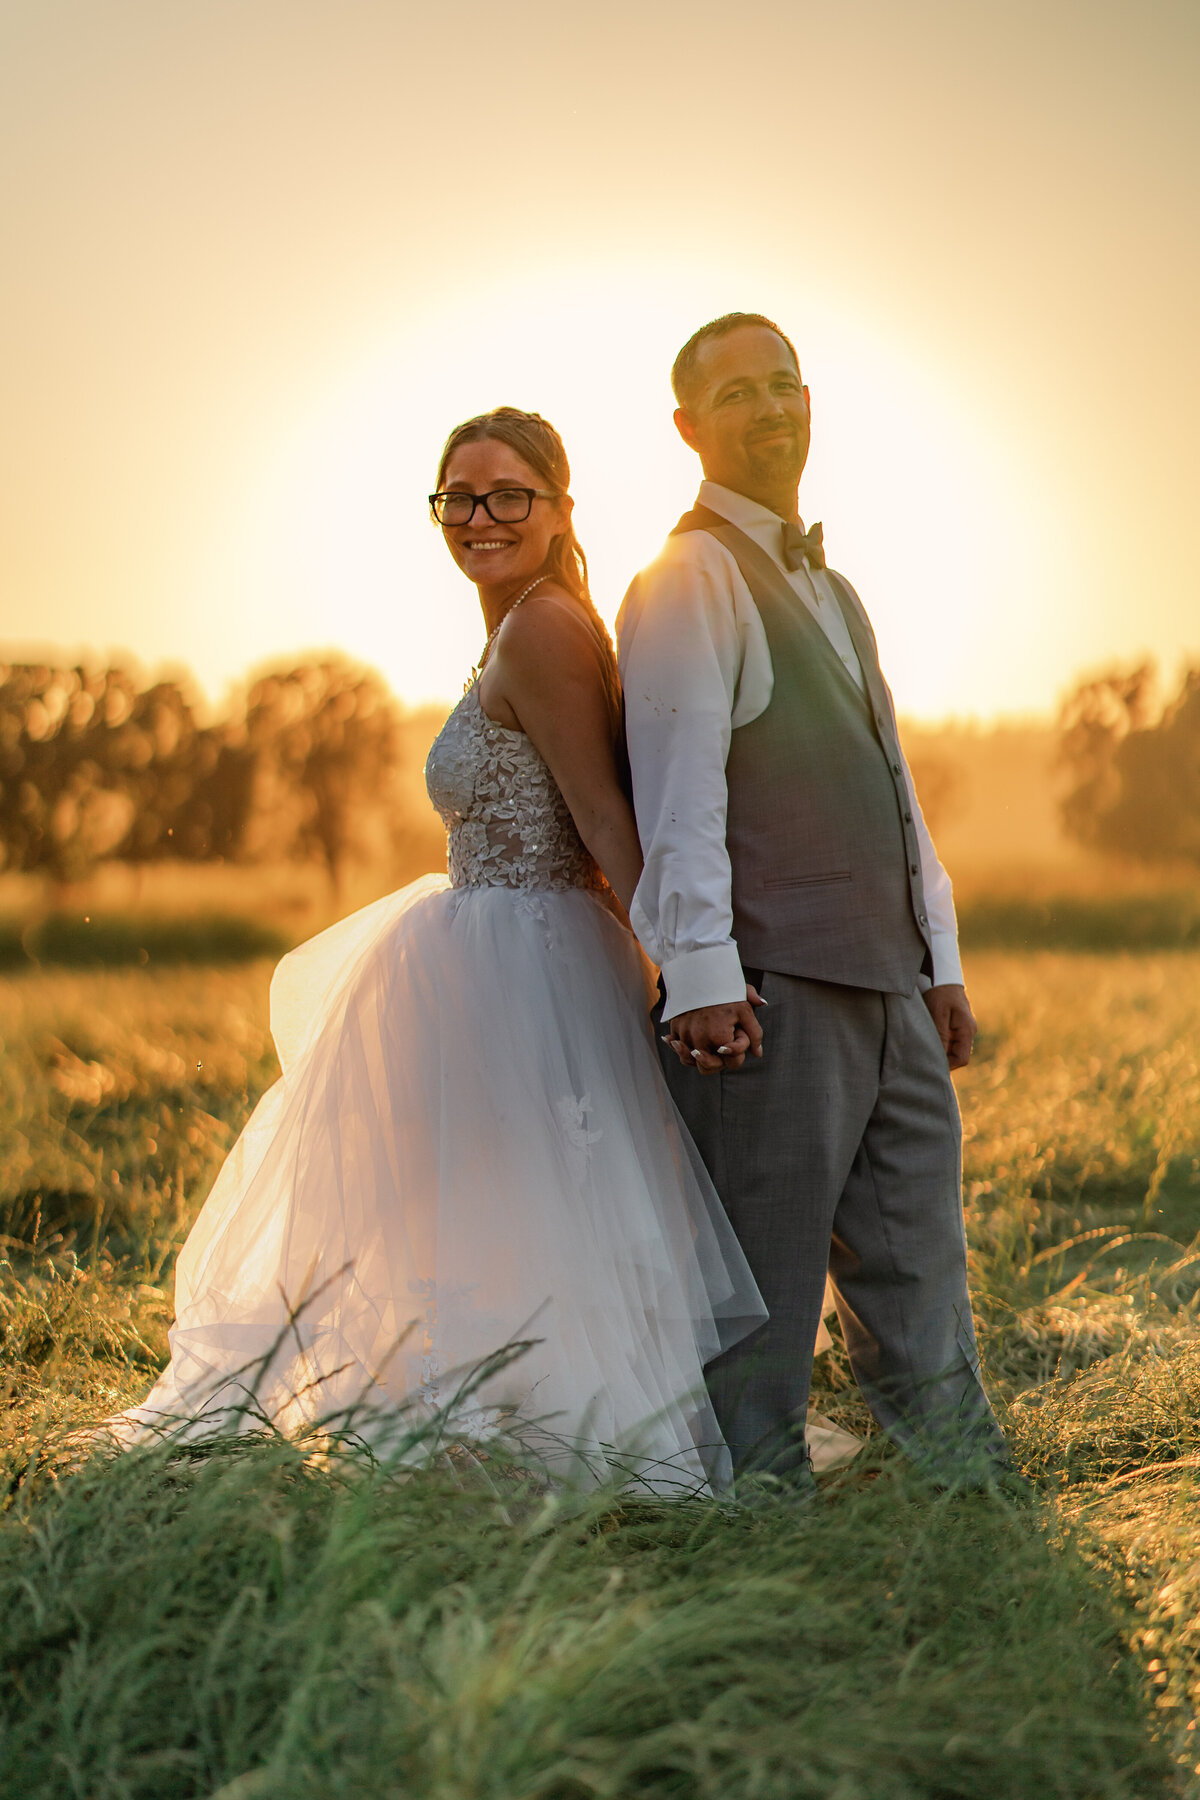 A photography session at the sunset with bride and groom